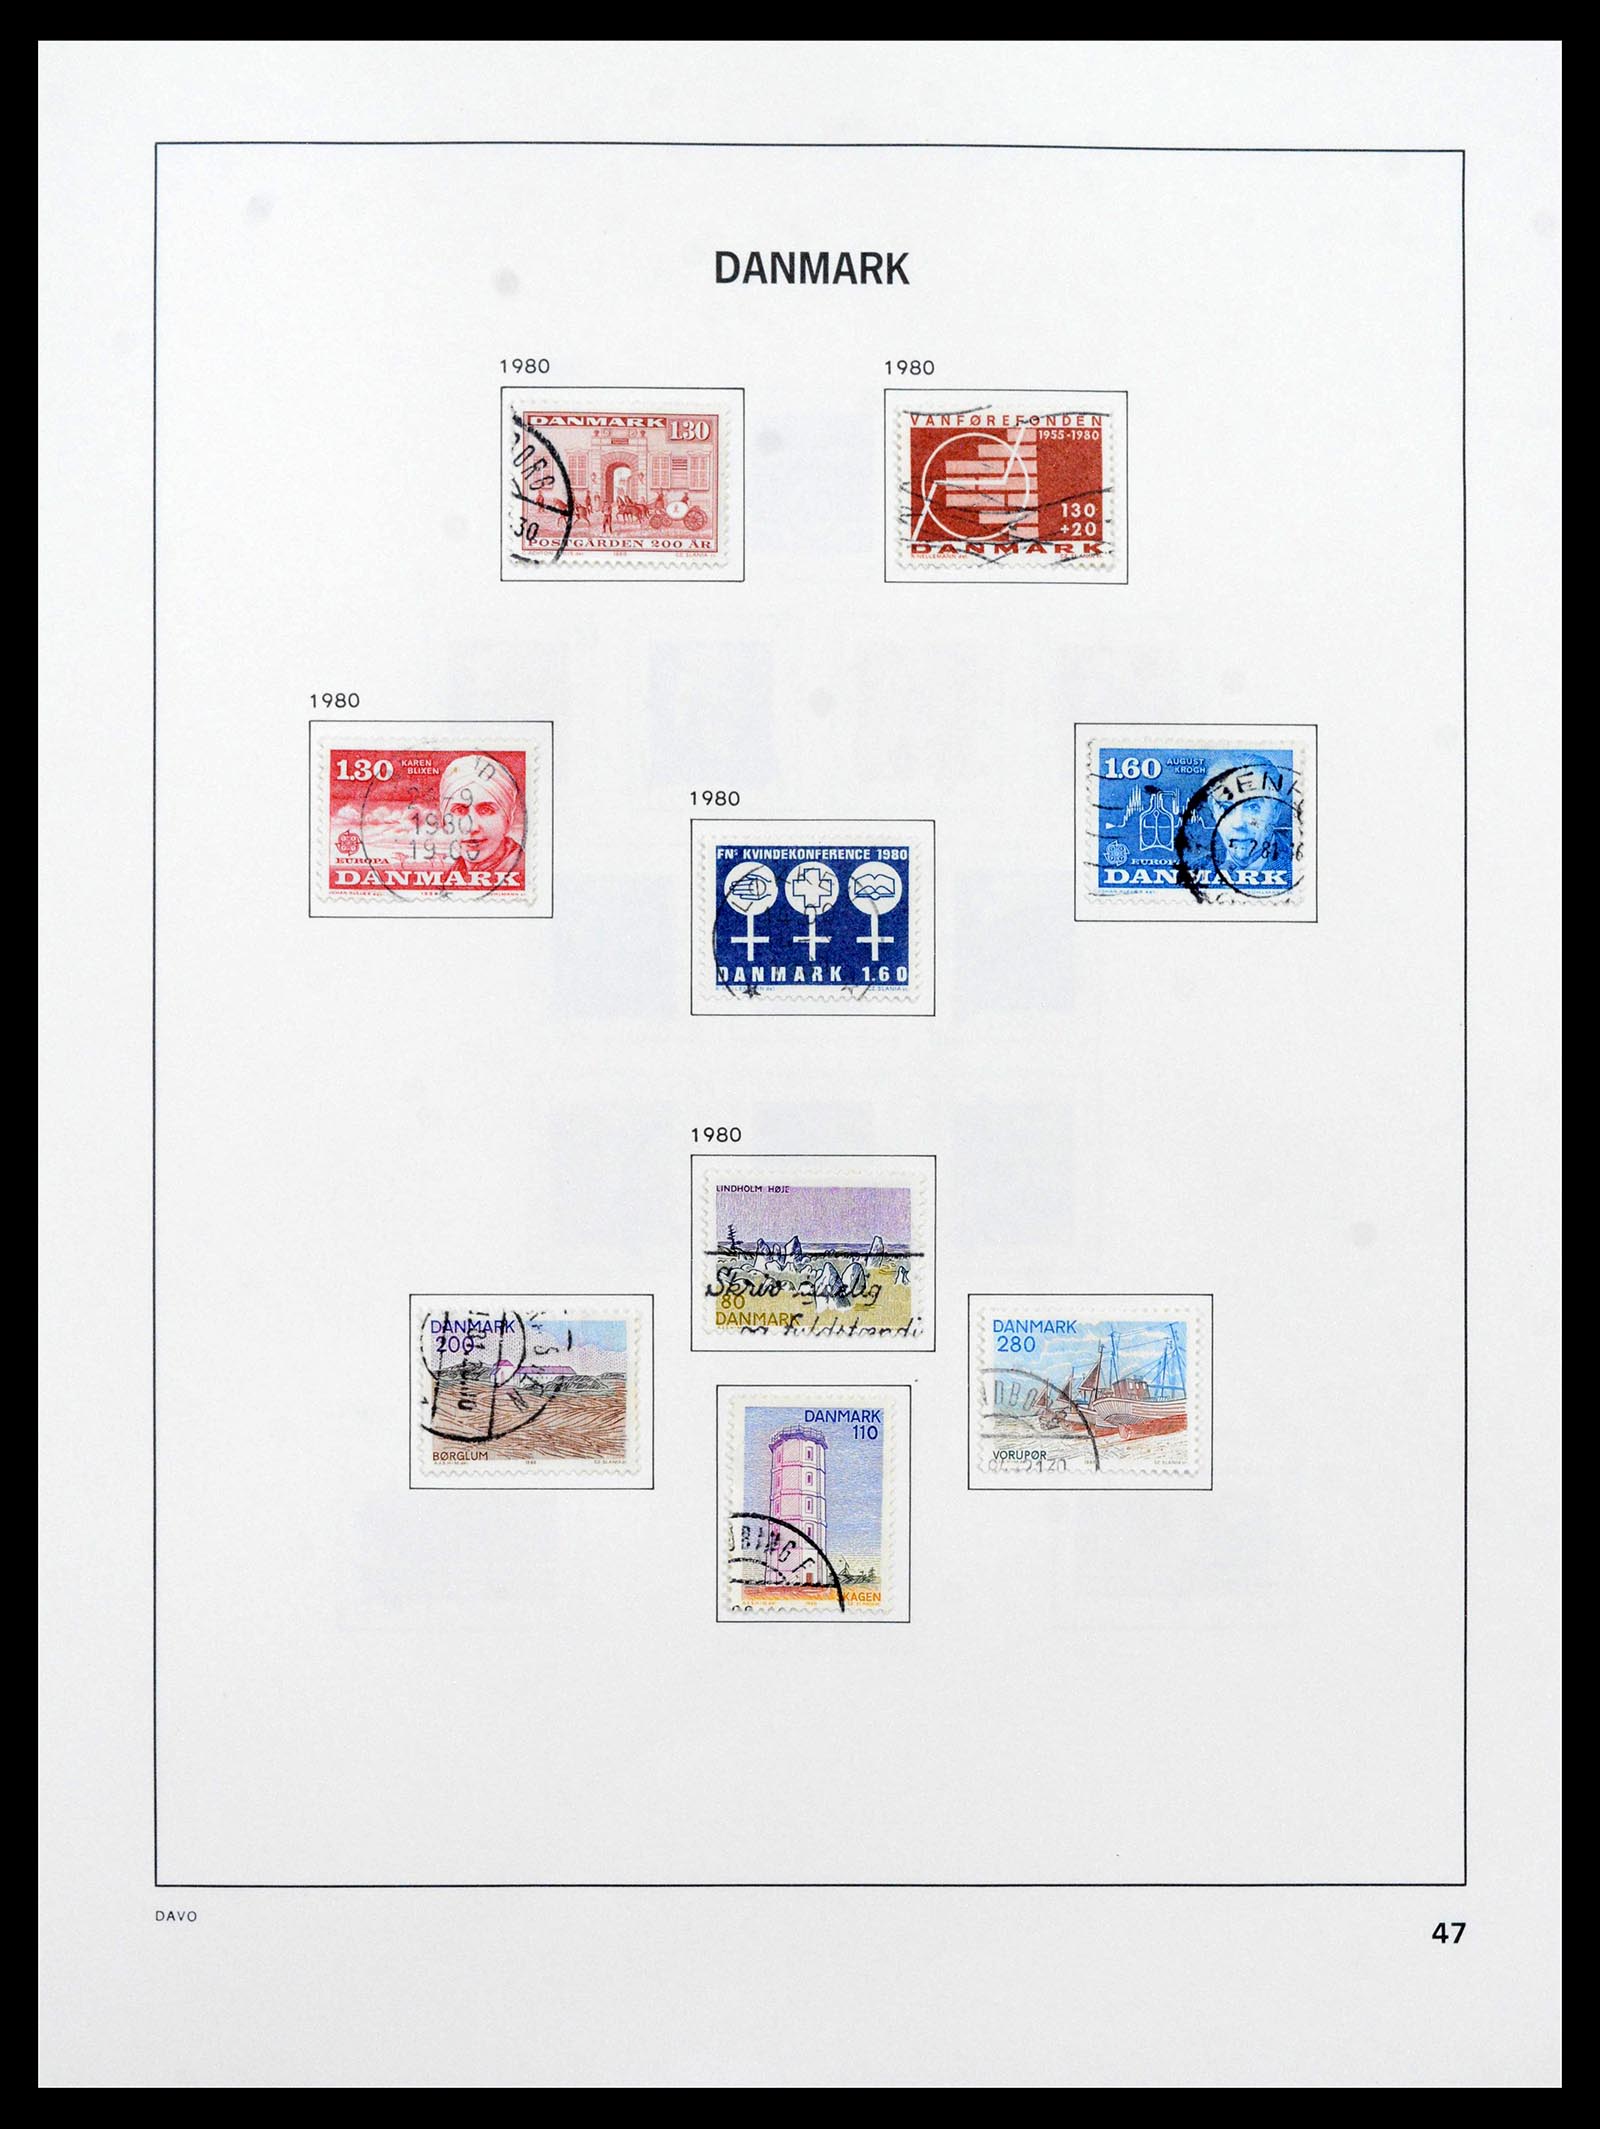 39428 0049 - Stamp collection 39428 Denmark 1851-2019.